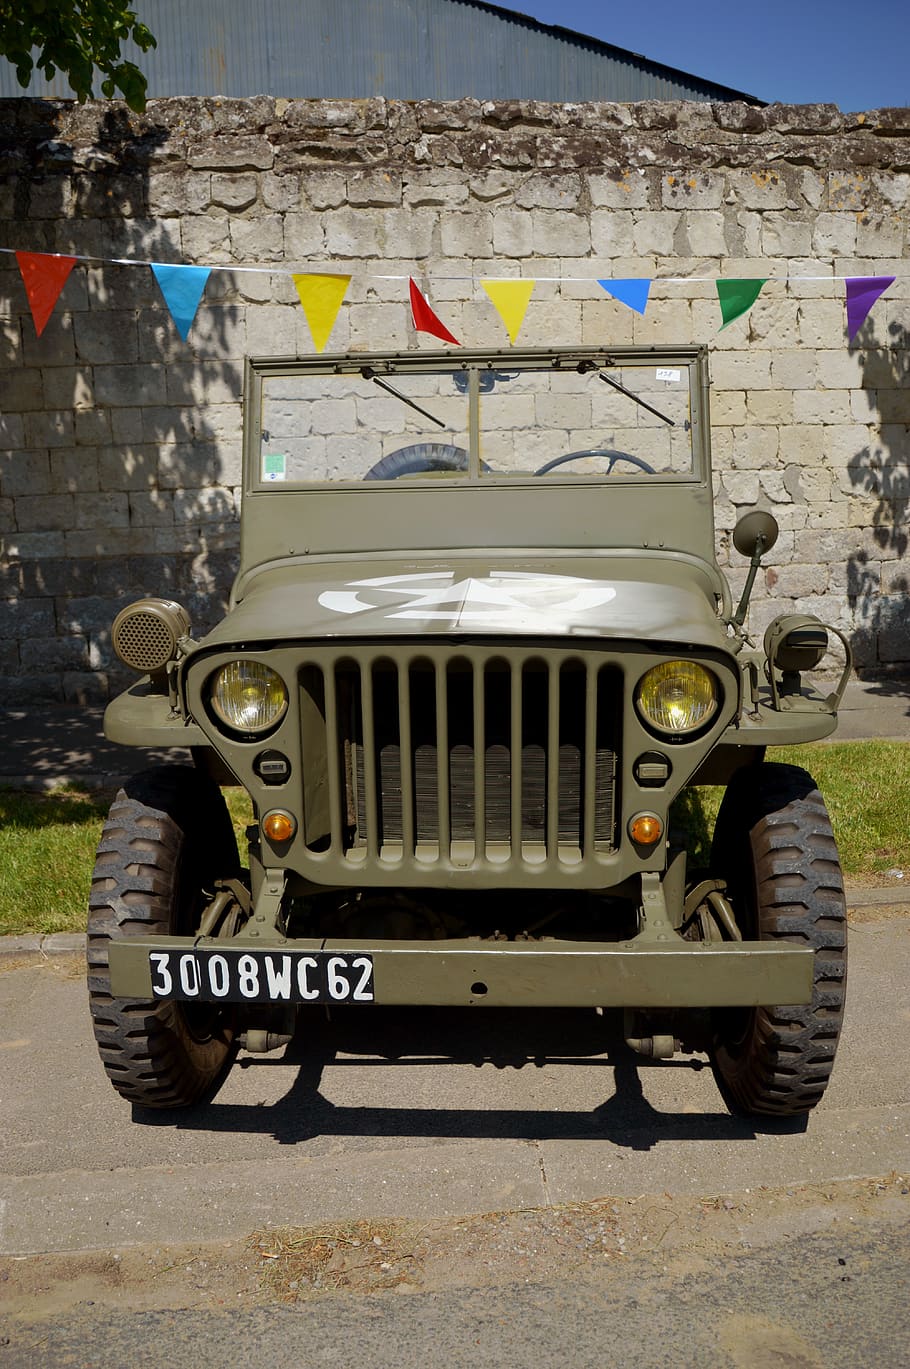 Hd Wallpaper Jeep Willys Vehicle Military Car Former Retro Khaki Army Wallpaper Flare